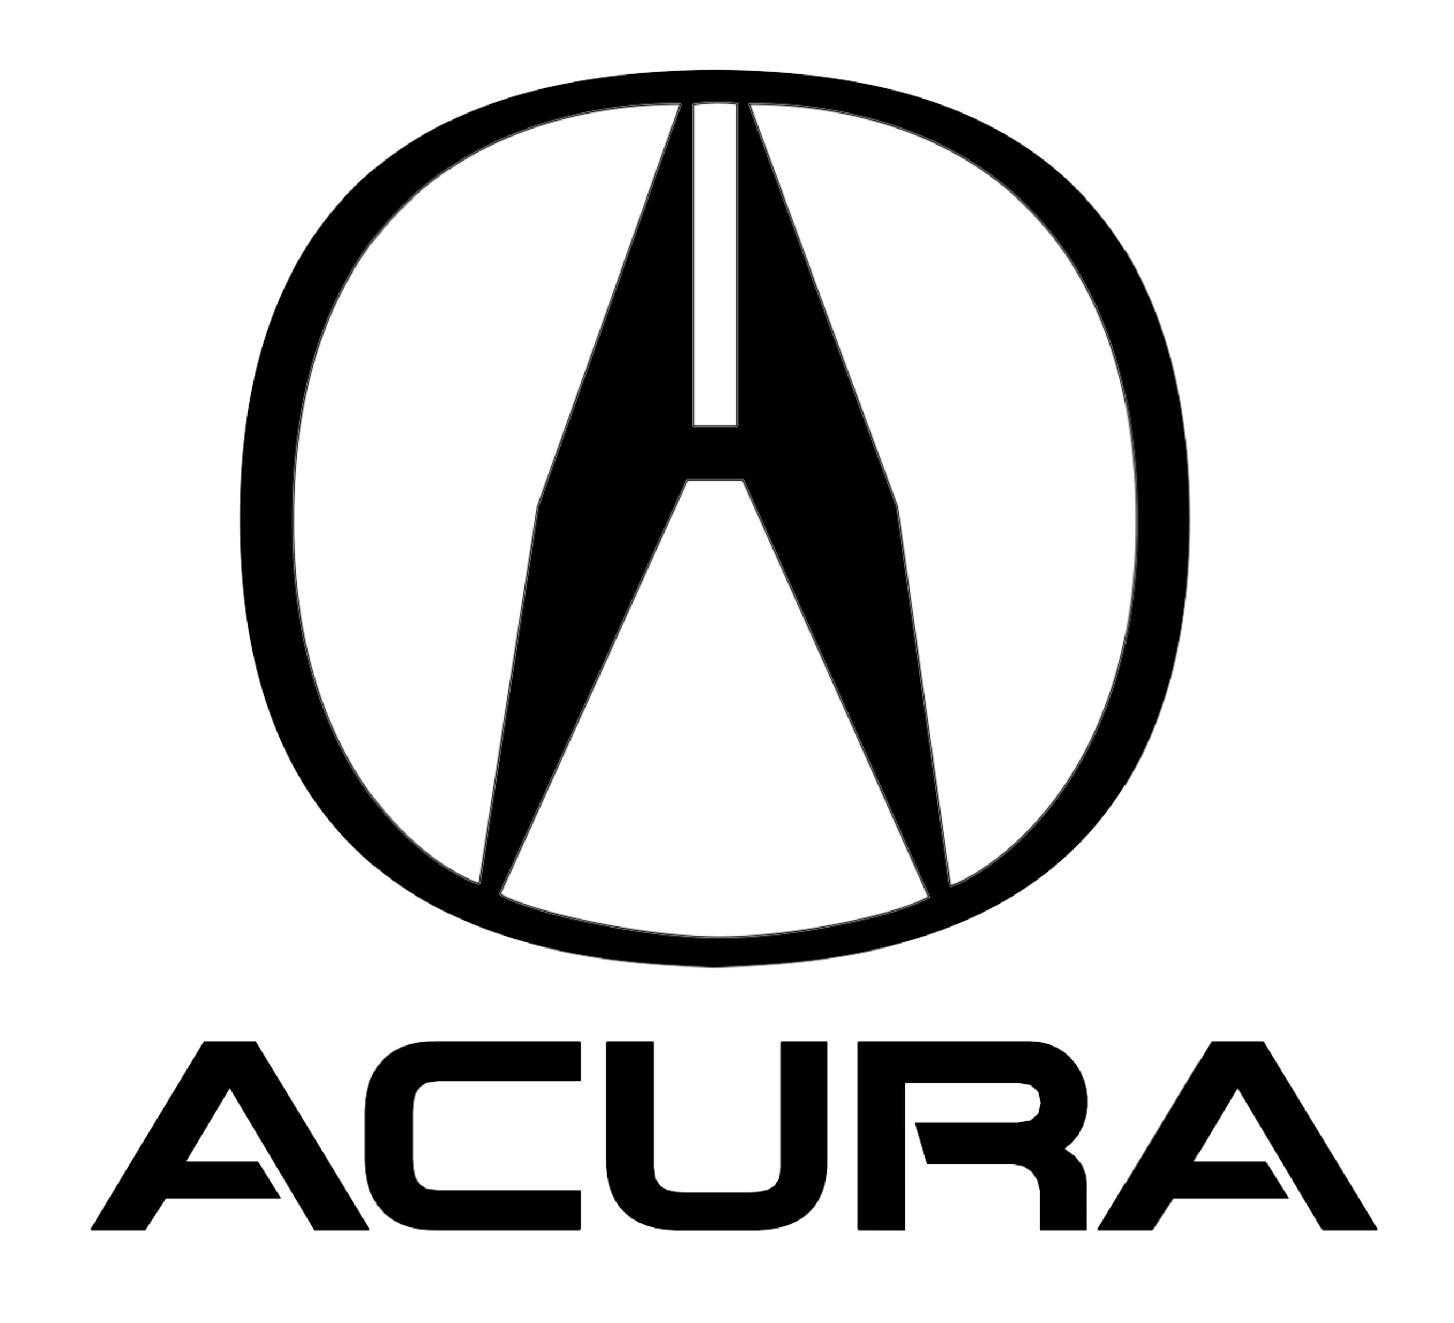 Pre-Owned Acura Cars for Sale in St Louis